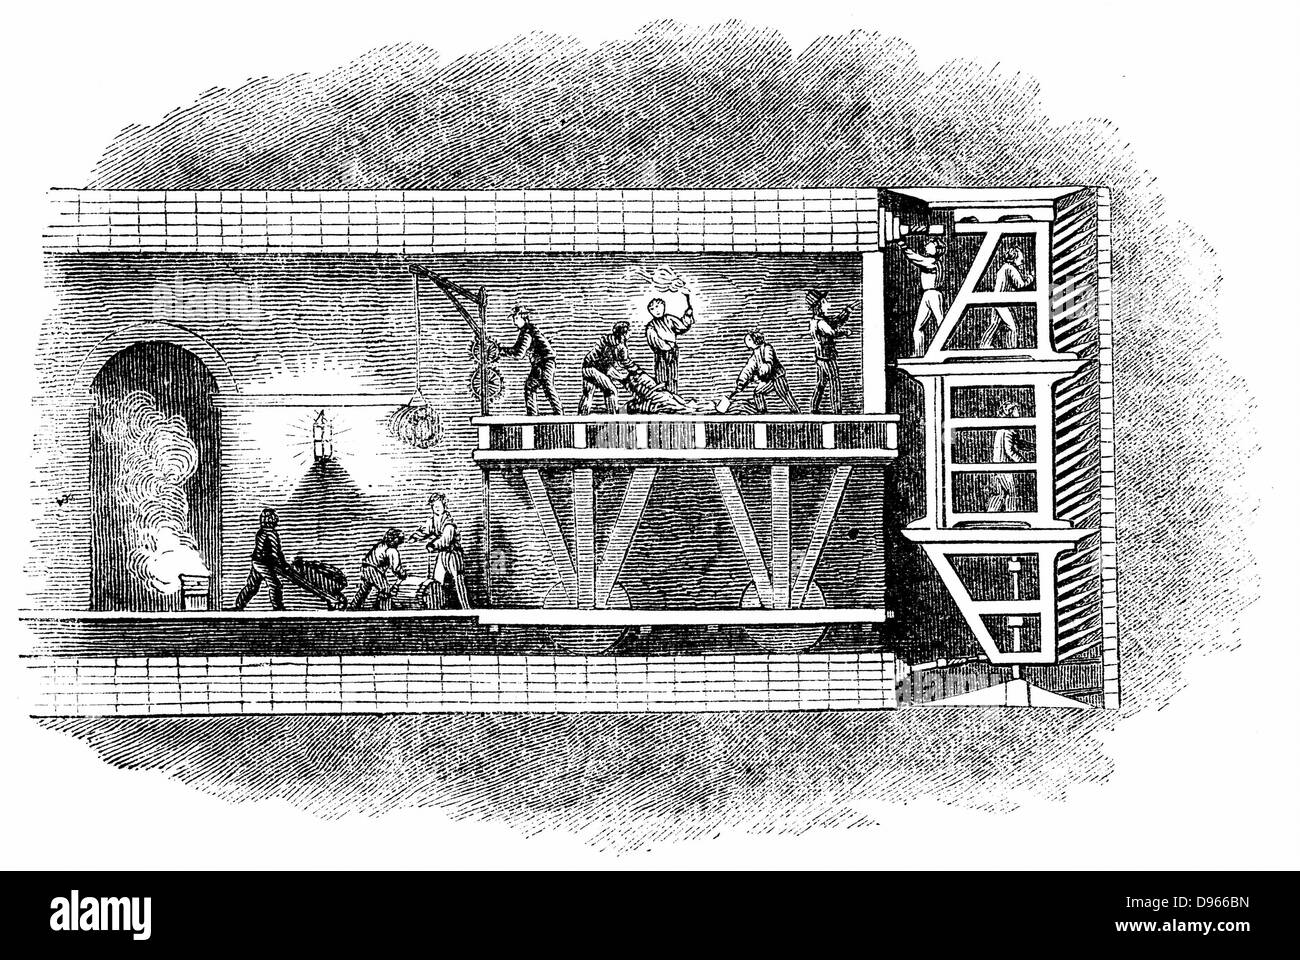 Section of Thames Tunnel (1825-1843) showing men at work in shield (right) while others take away spoil. Picture also shows construction of arched masonry lining using Roman cement behind shield. Patent for this first tunnelling shield taken out by Marc Isambart Brunel 1818. Isambard Kingdom Brunel was site engineer. Tunnel still used by electric trains between Whitechapel and New Cross, London. Woodcut 1842. Stock Photo